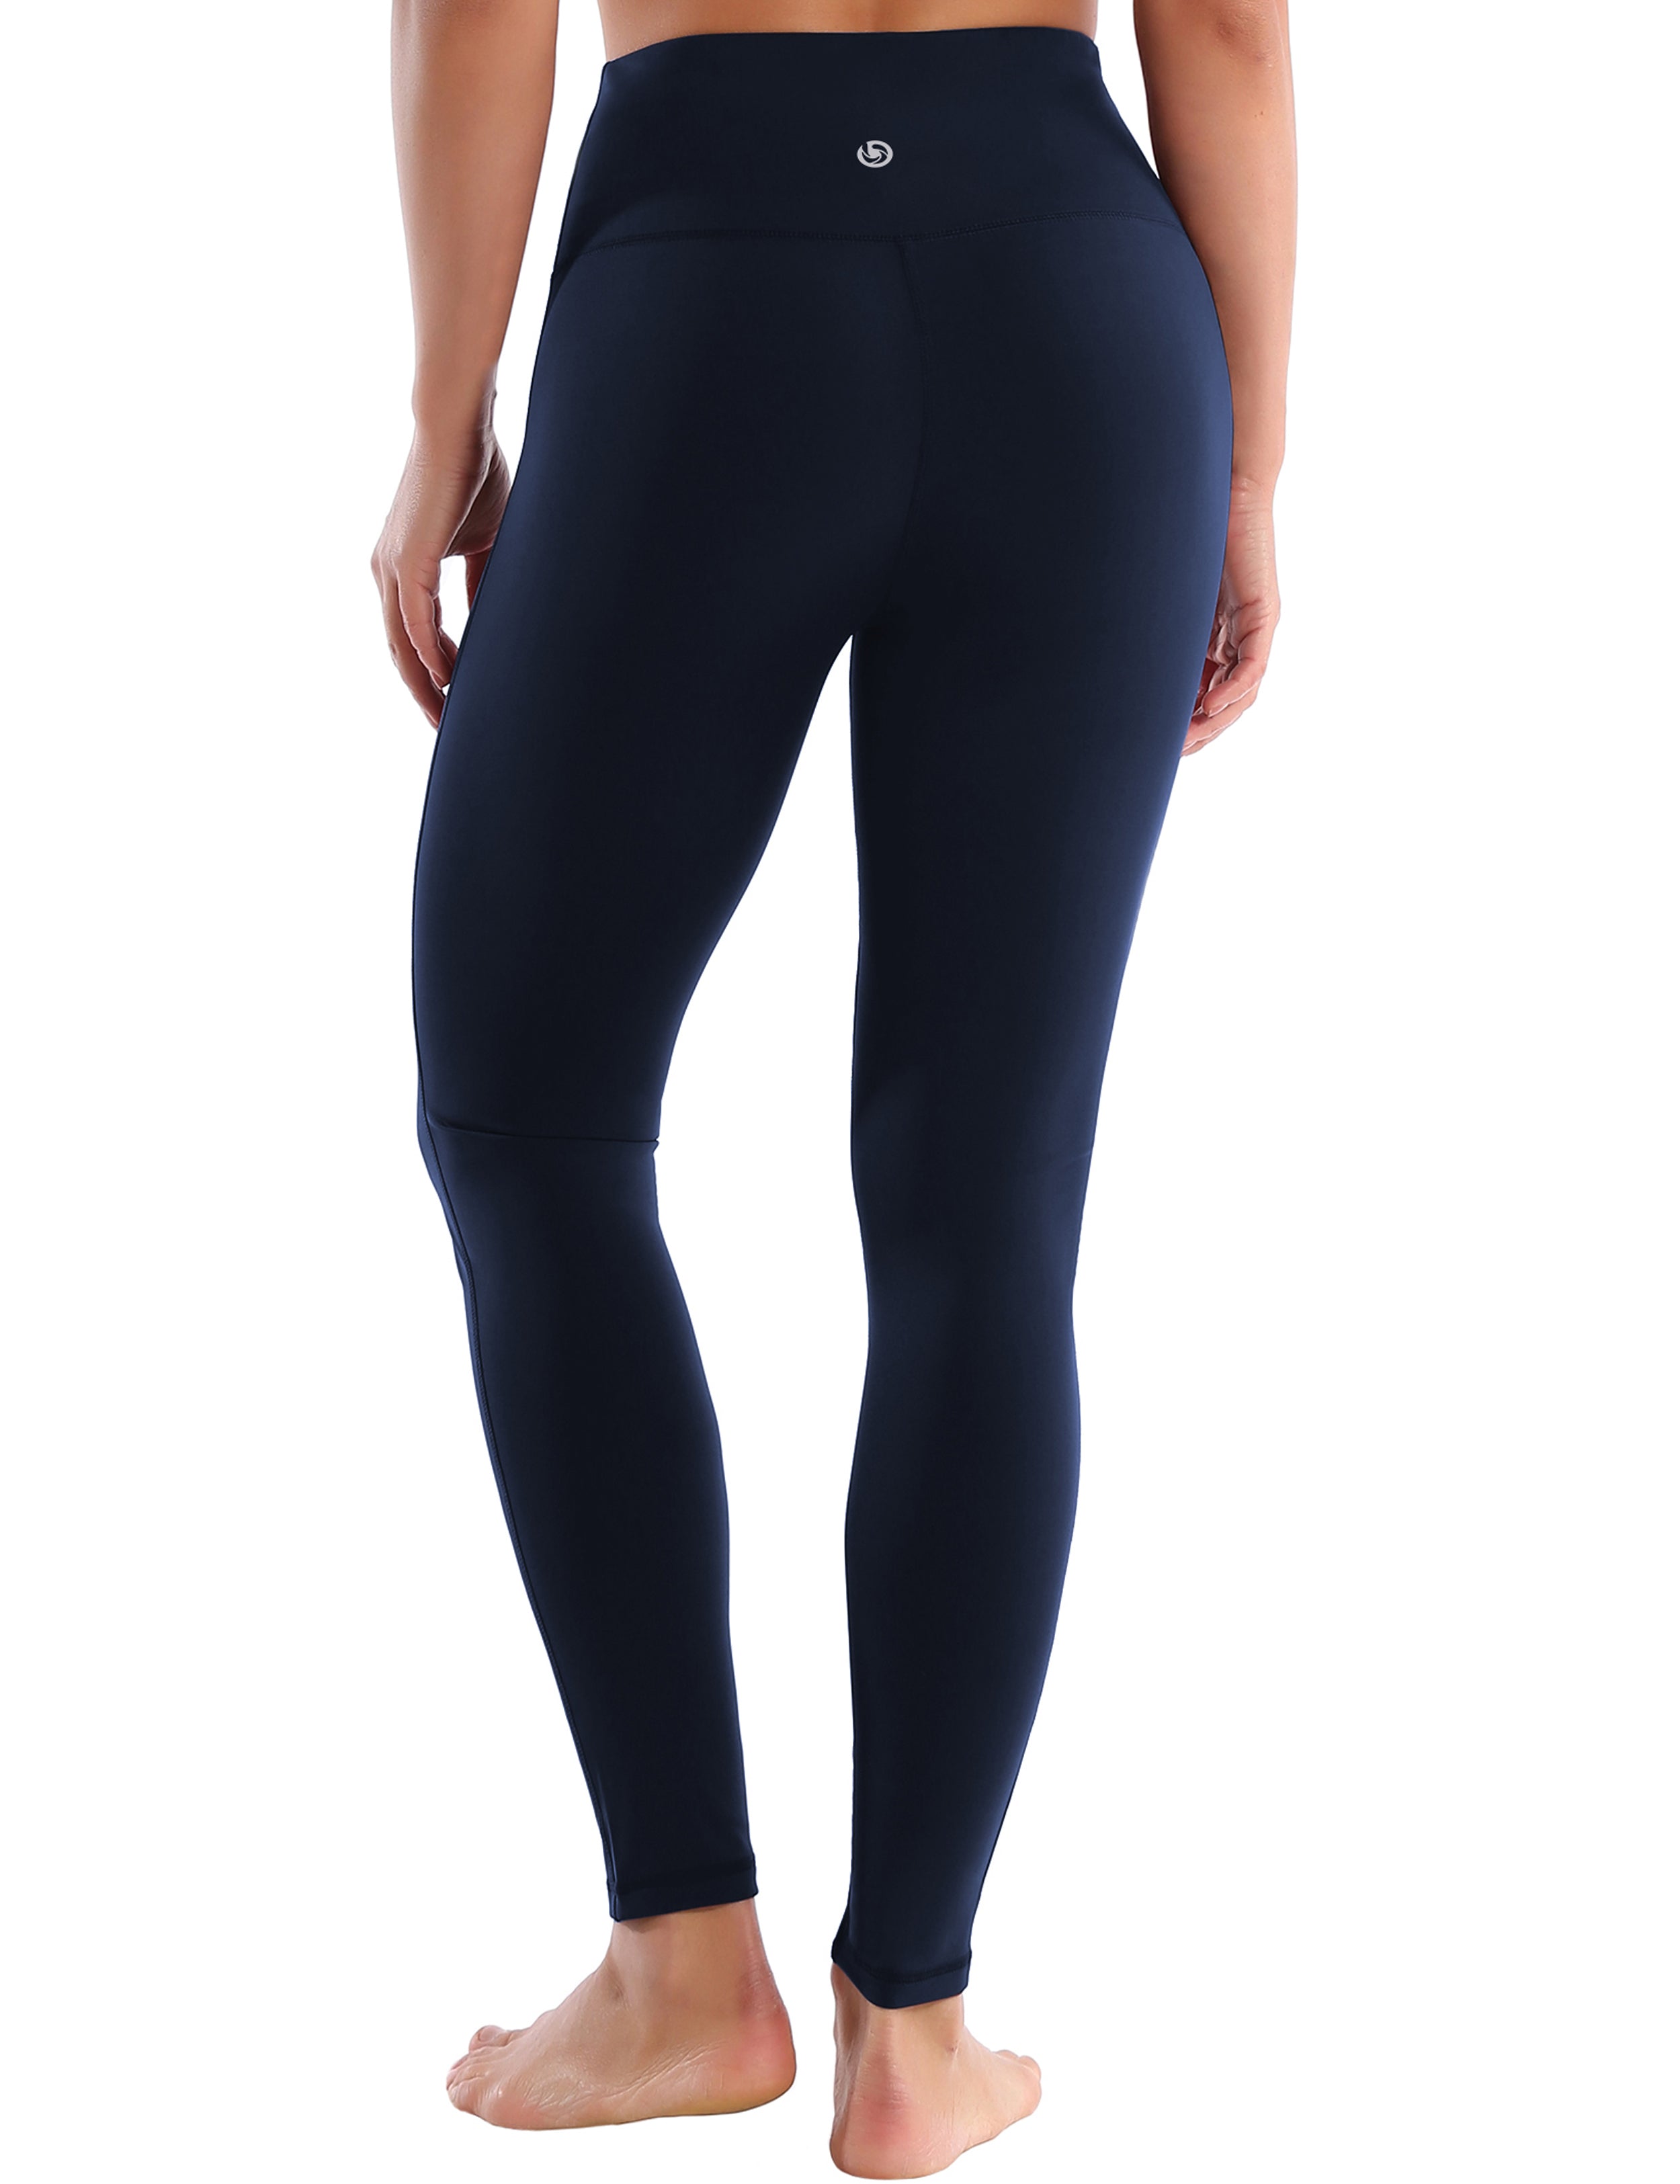 High Waist Side Line Yoga Pants darknavy Side Line is Make Your Legs Look Longer and Thinner 75%Nylon/25%Spandex Fabric doesn't attract lint easily 4-way stretch No see-through Moisture-wicking Tummy control Inner pocket Two lengths